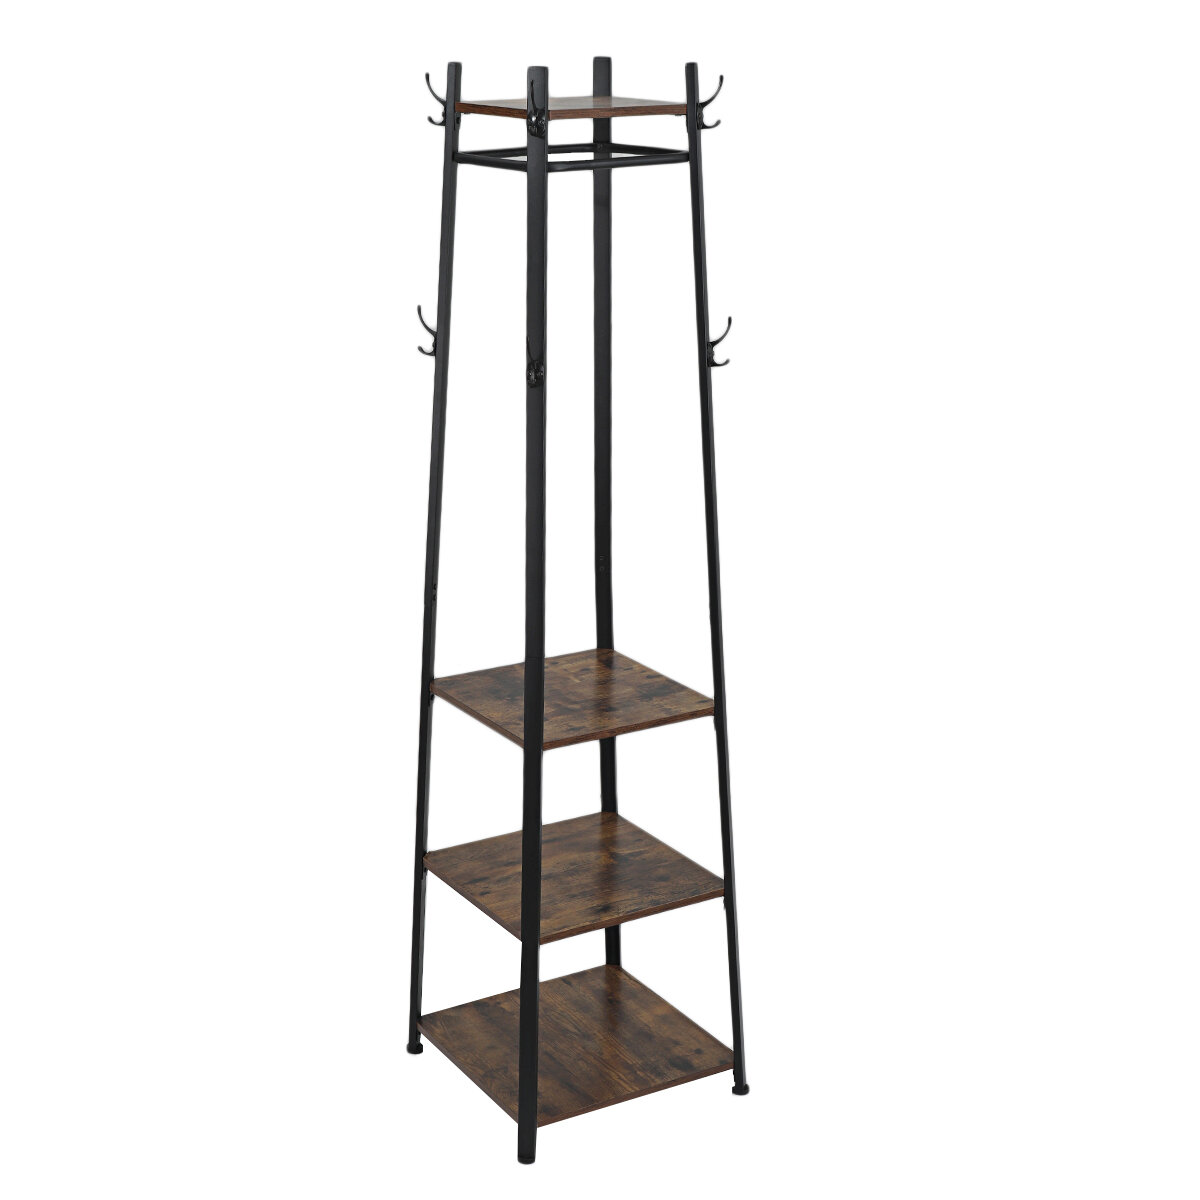 Image of Lusimo Coat Rack Clothes With 4 Tier Storage Shelves Hanger Wooden Living Room Home